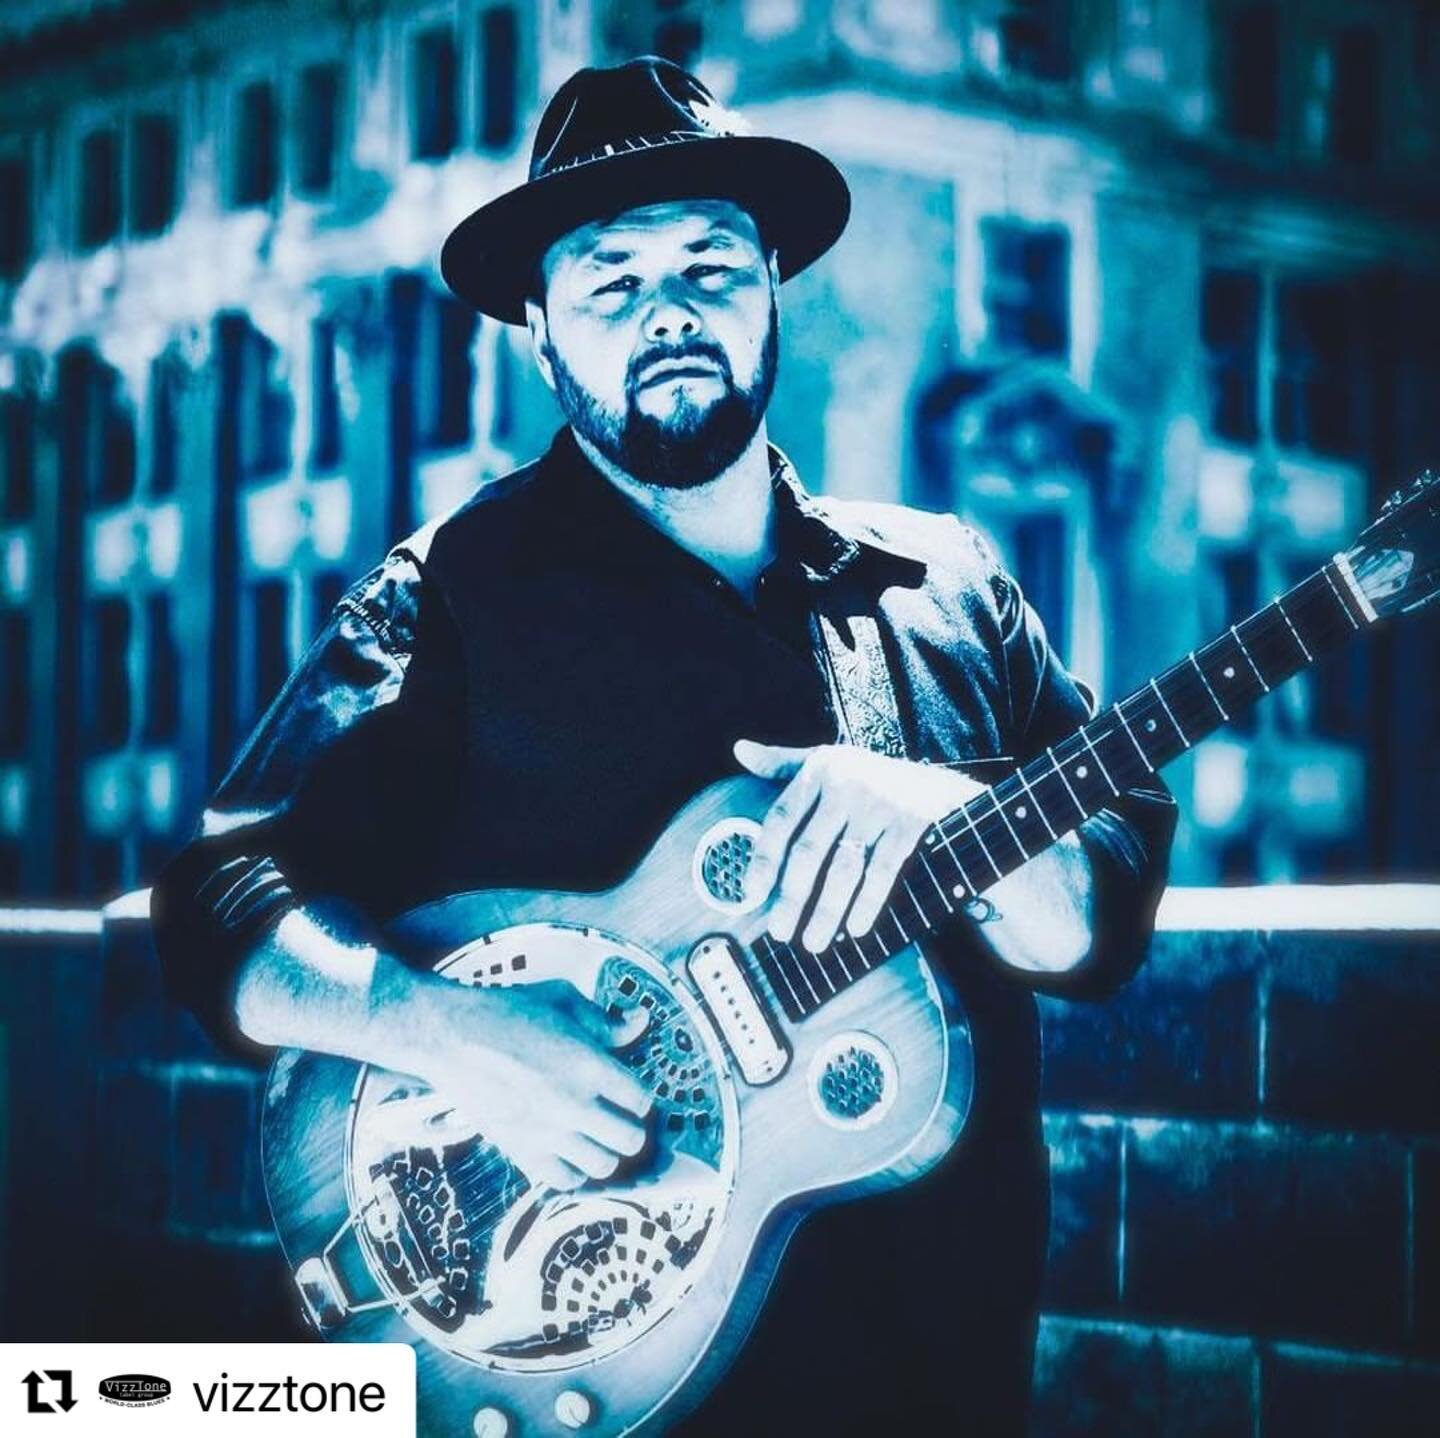 Happy to announce the signing with Vizztone! 🙌🏽 

#Repost @vizztone with @make_repost
・・・
VizzTone is proud to announce the signing of quickly rising singer/songwriter/guitarist H&eacute;ctor Anchondo. Hector was the 1st place Solo/Duo and Memphis 